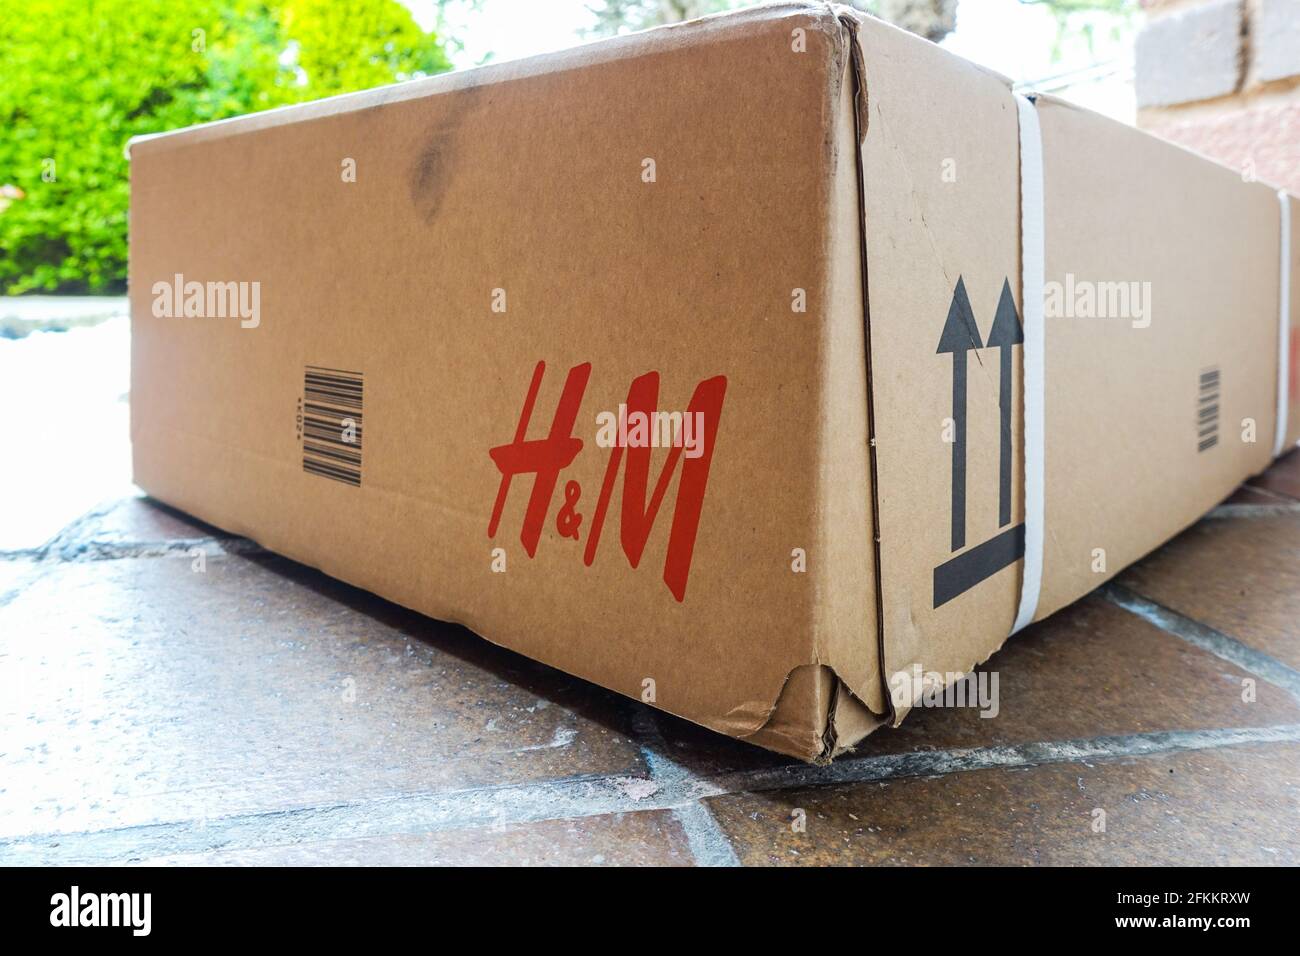 H&M fashion retailer parcel delivery in recyclable cardboard box Stock Photo